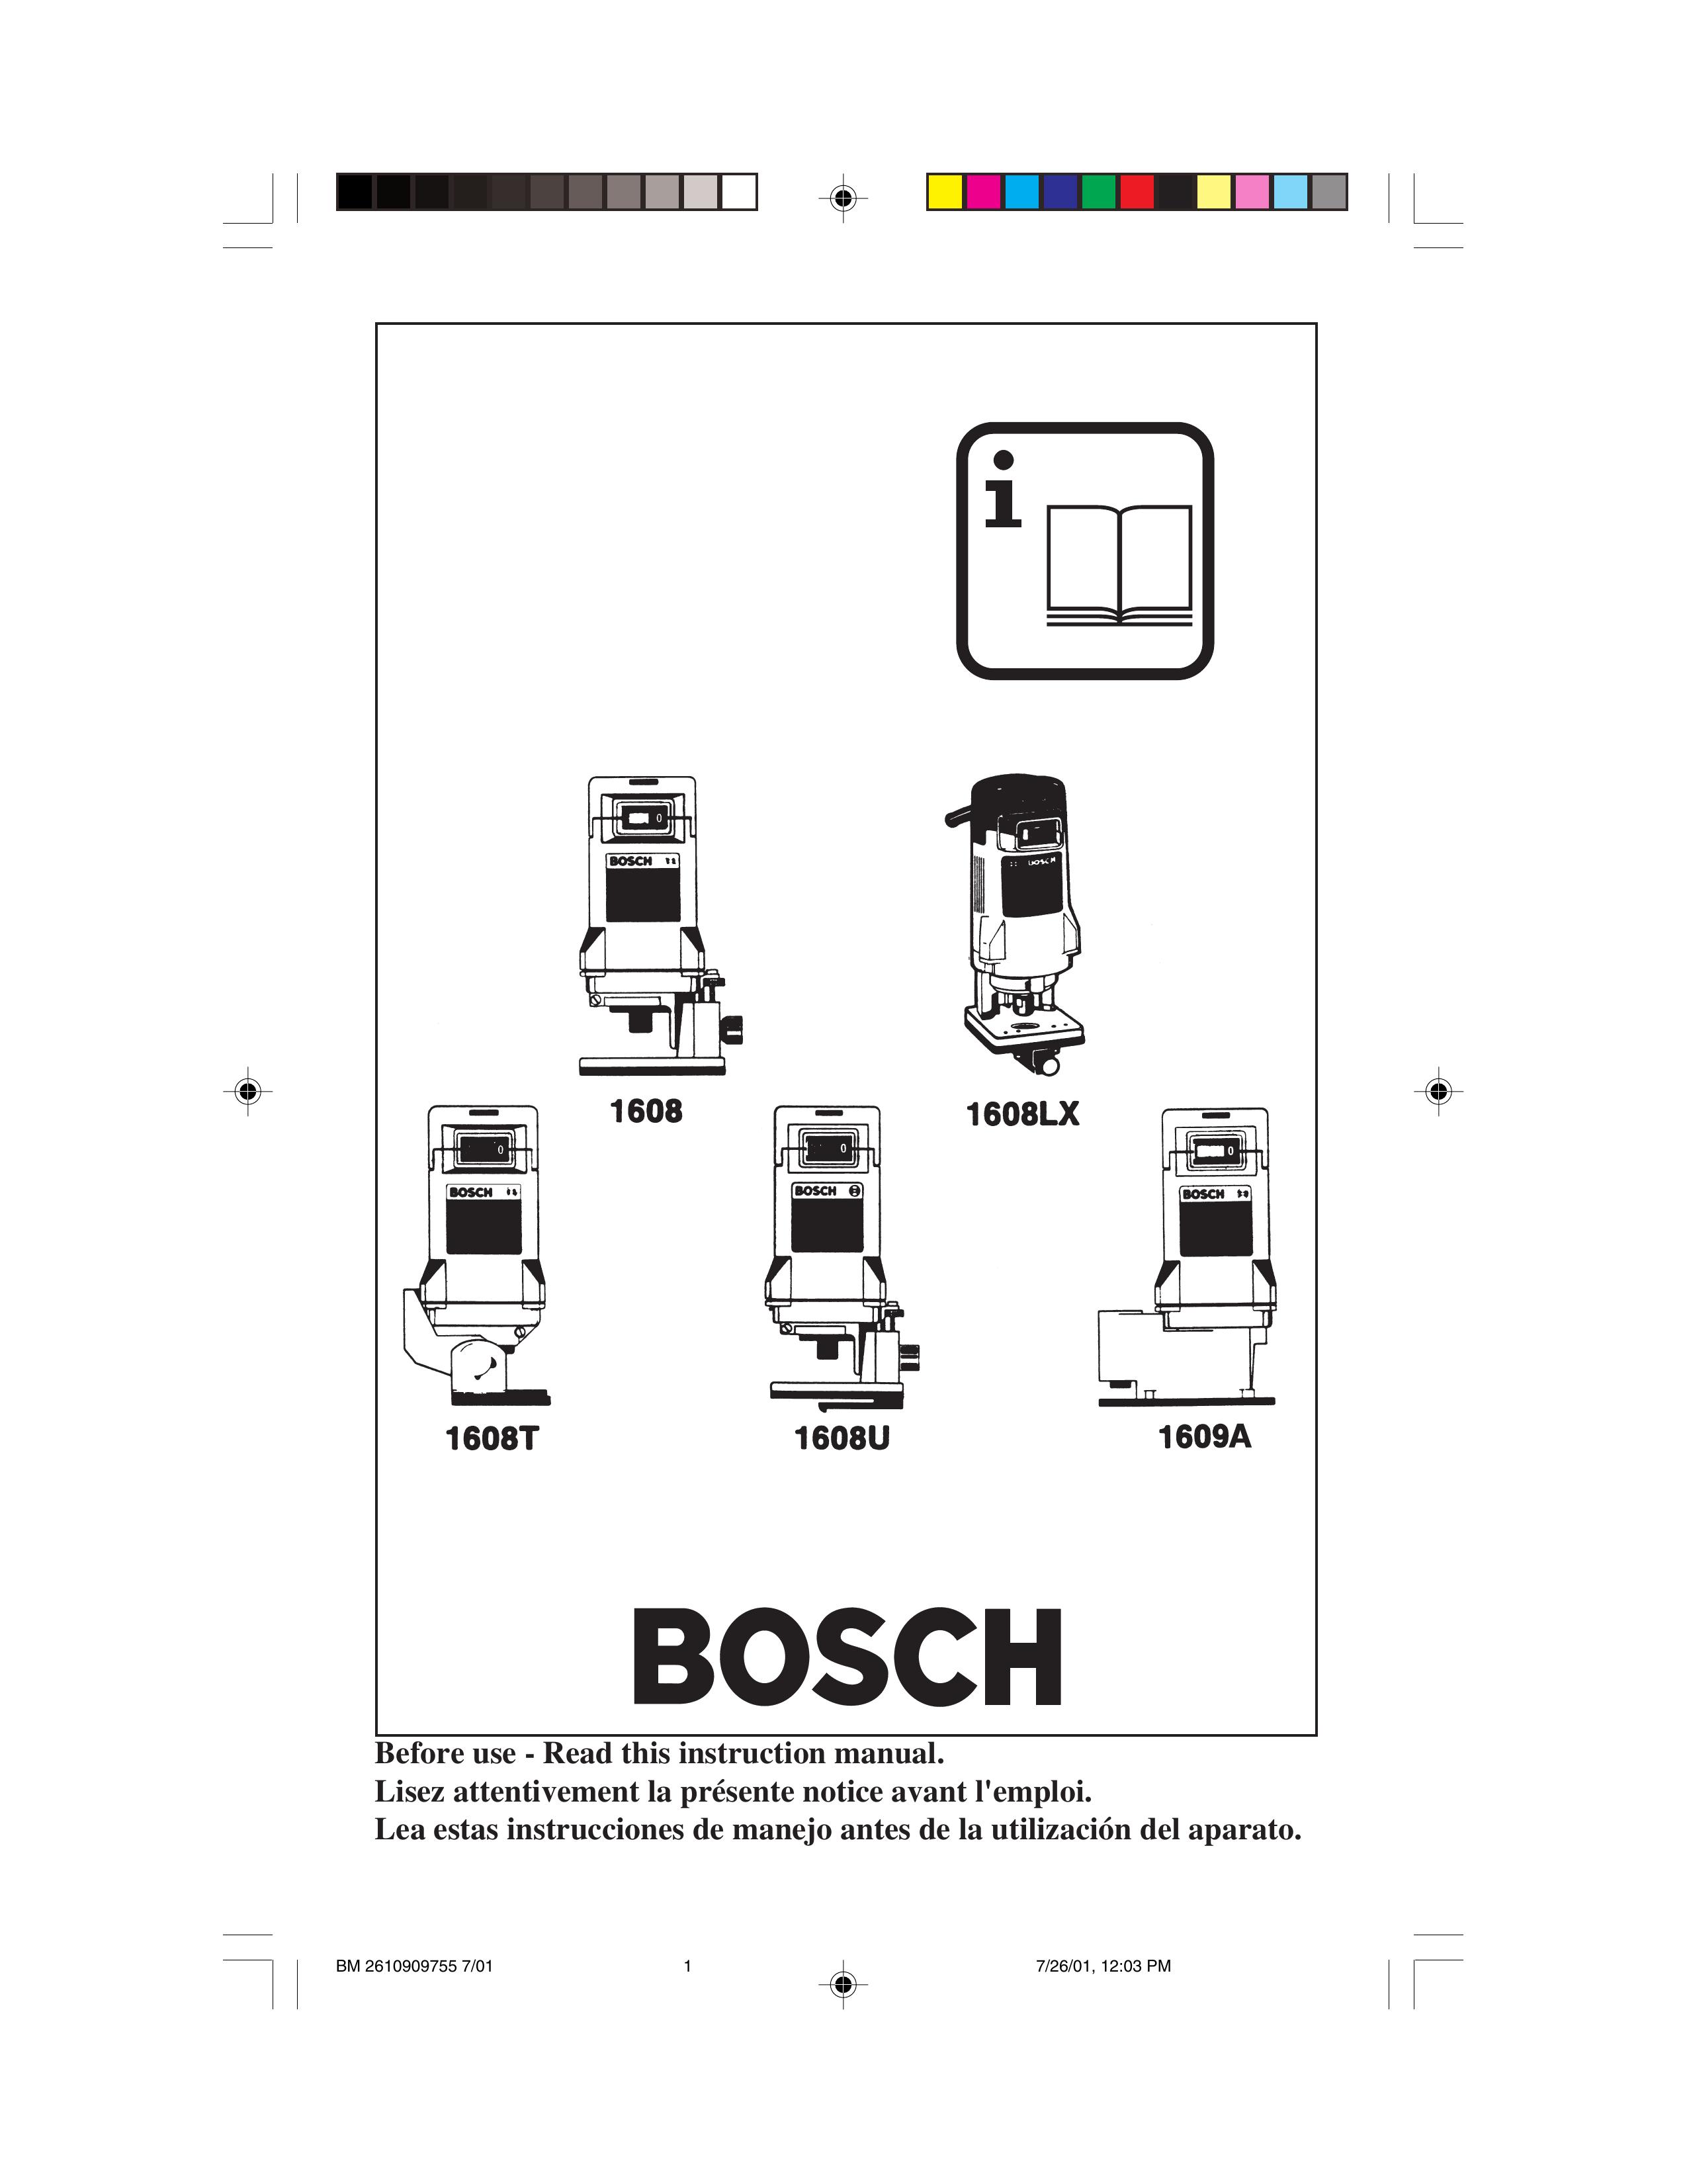 Bosch Power Tools 1608LX Trimmer User Manual